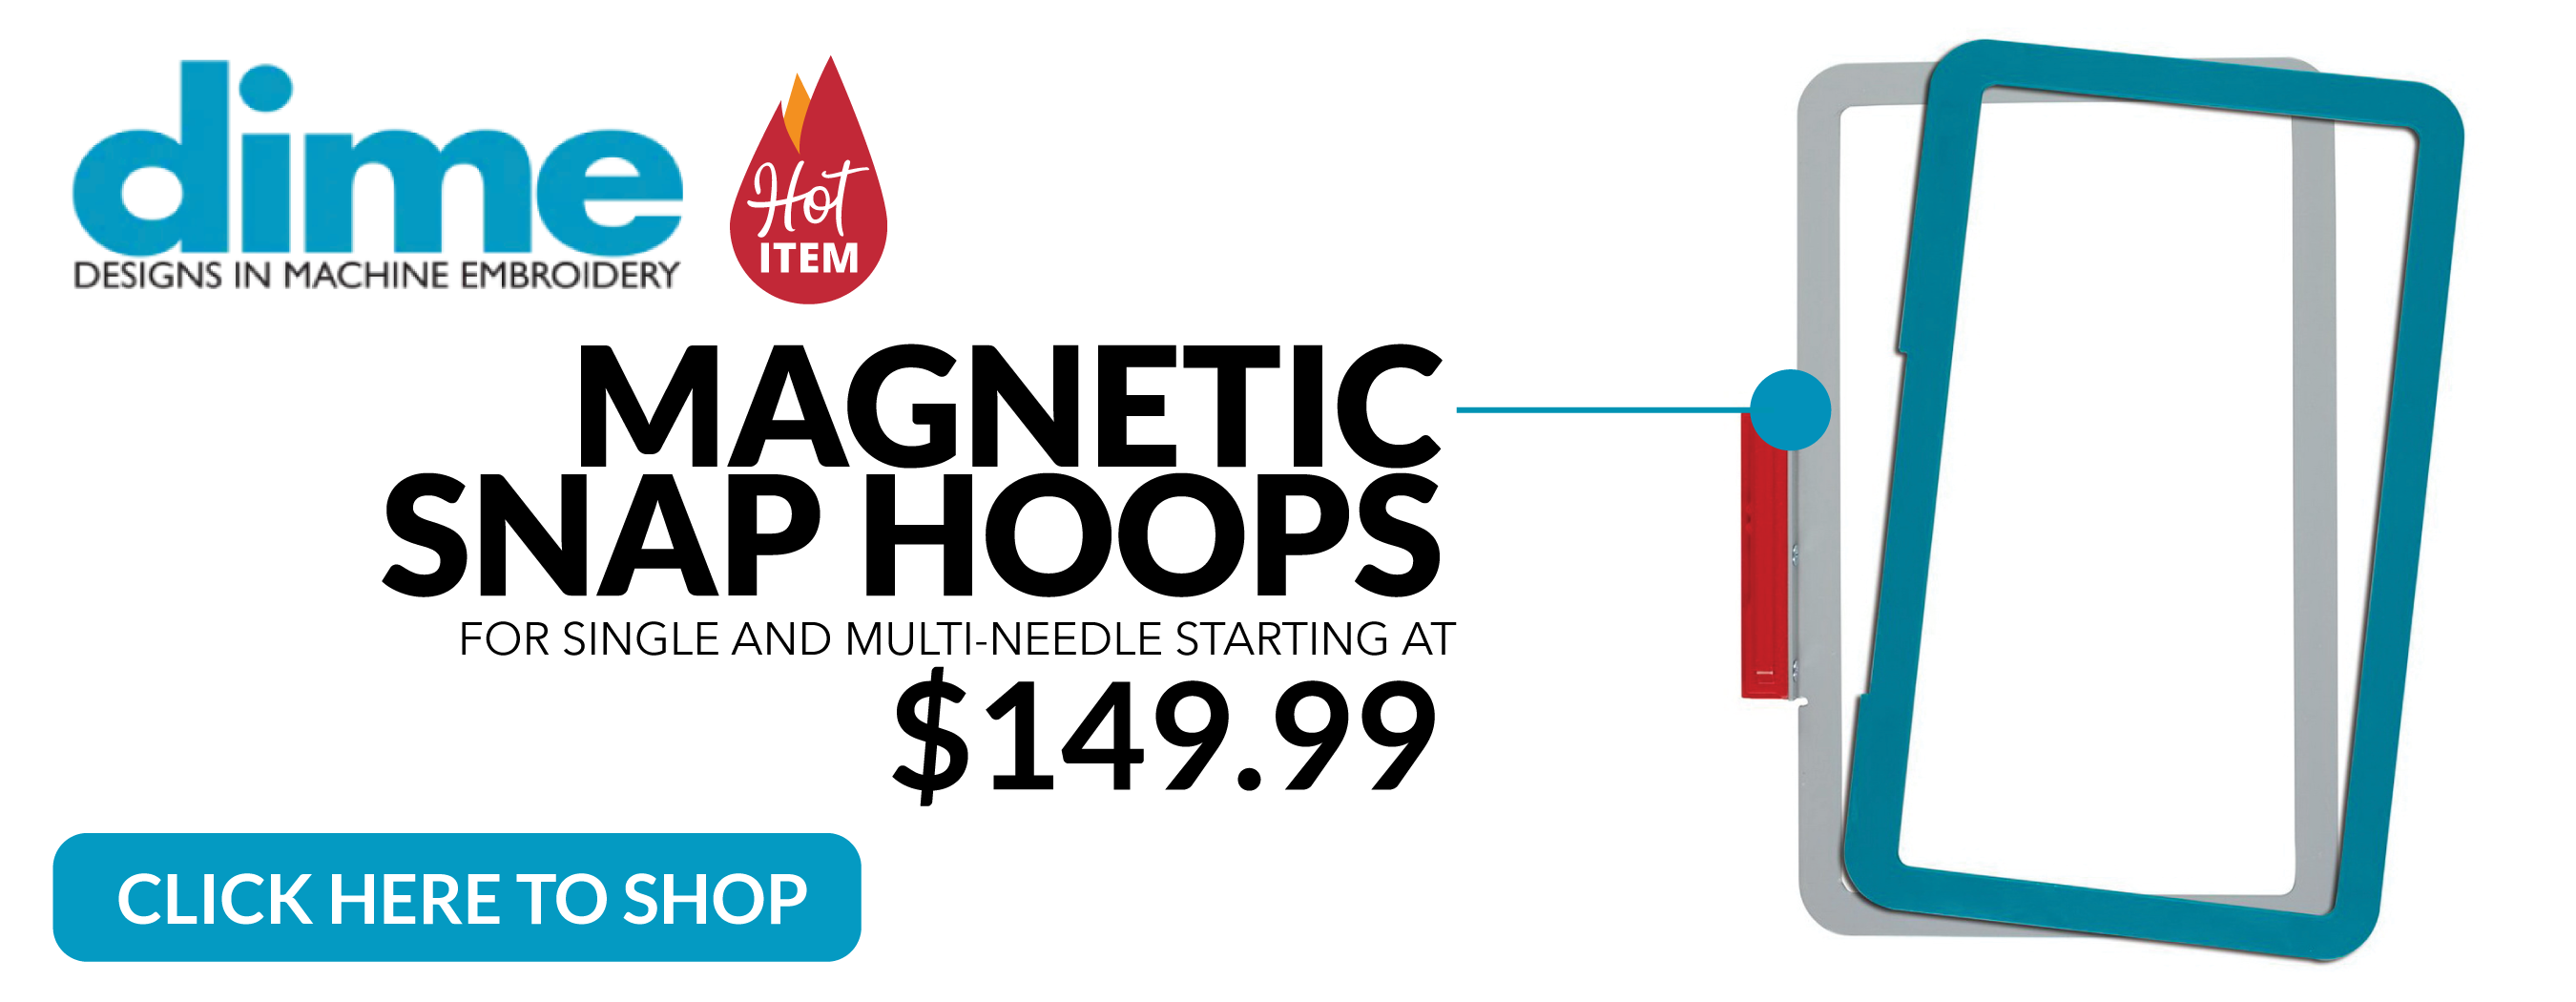 dime magnetic snap hoops. for single and multineedle starting at $149.99. click here to shop